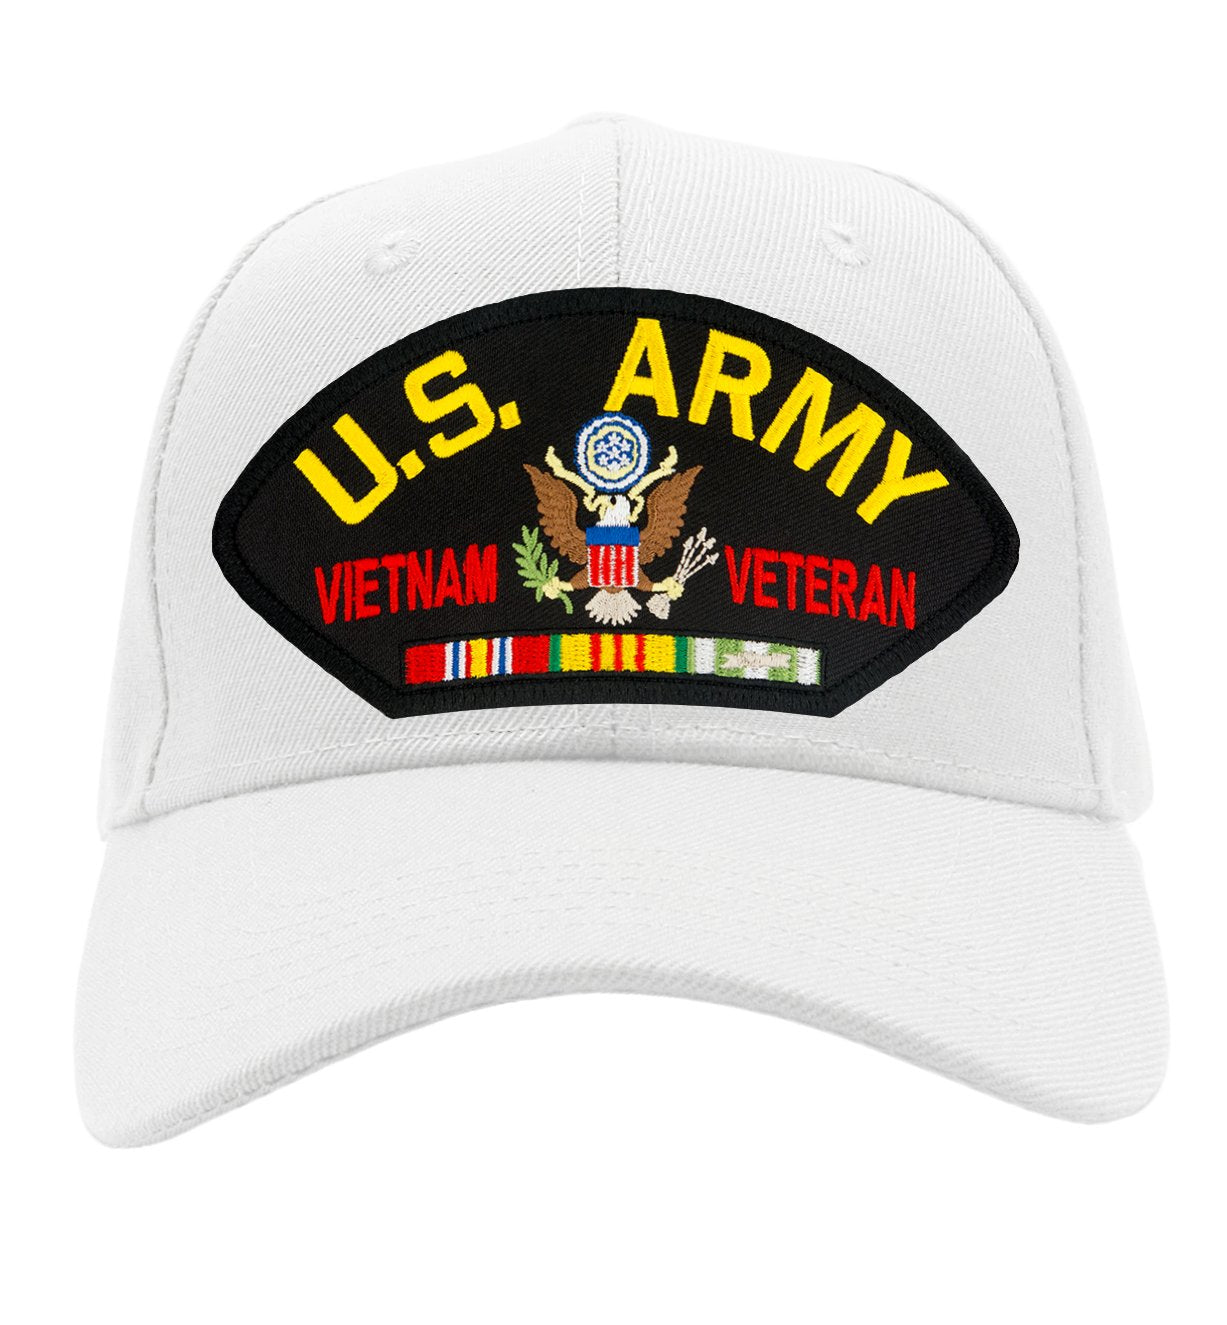 US Army - Vietnam Veteran Hat - Multiple Colors Available